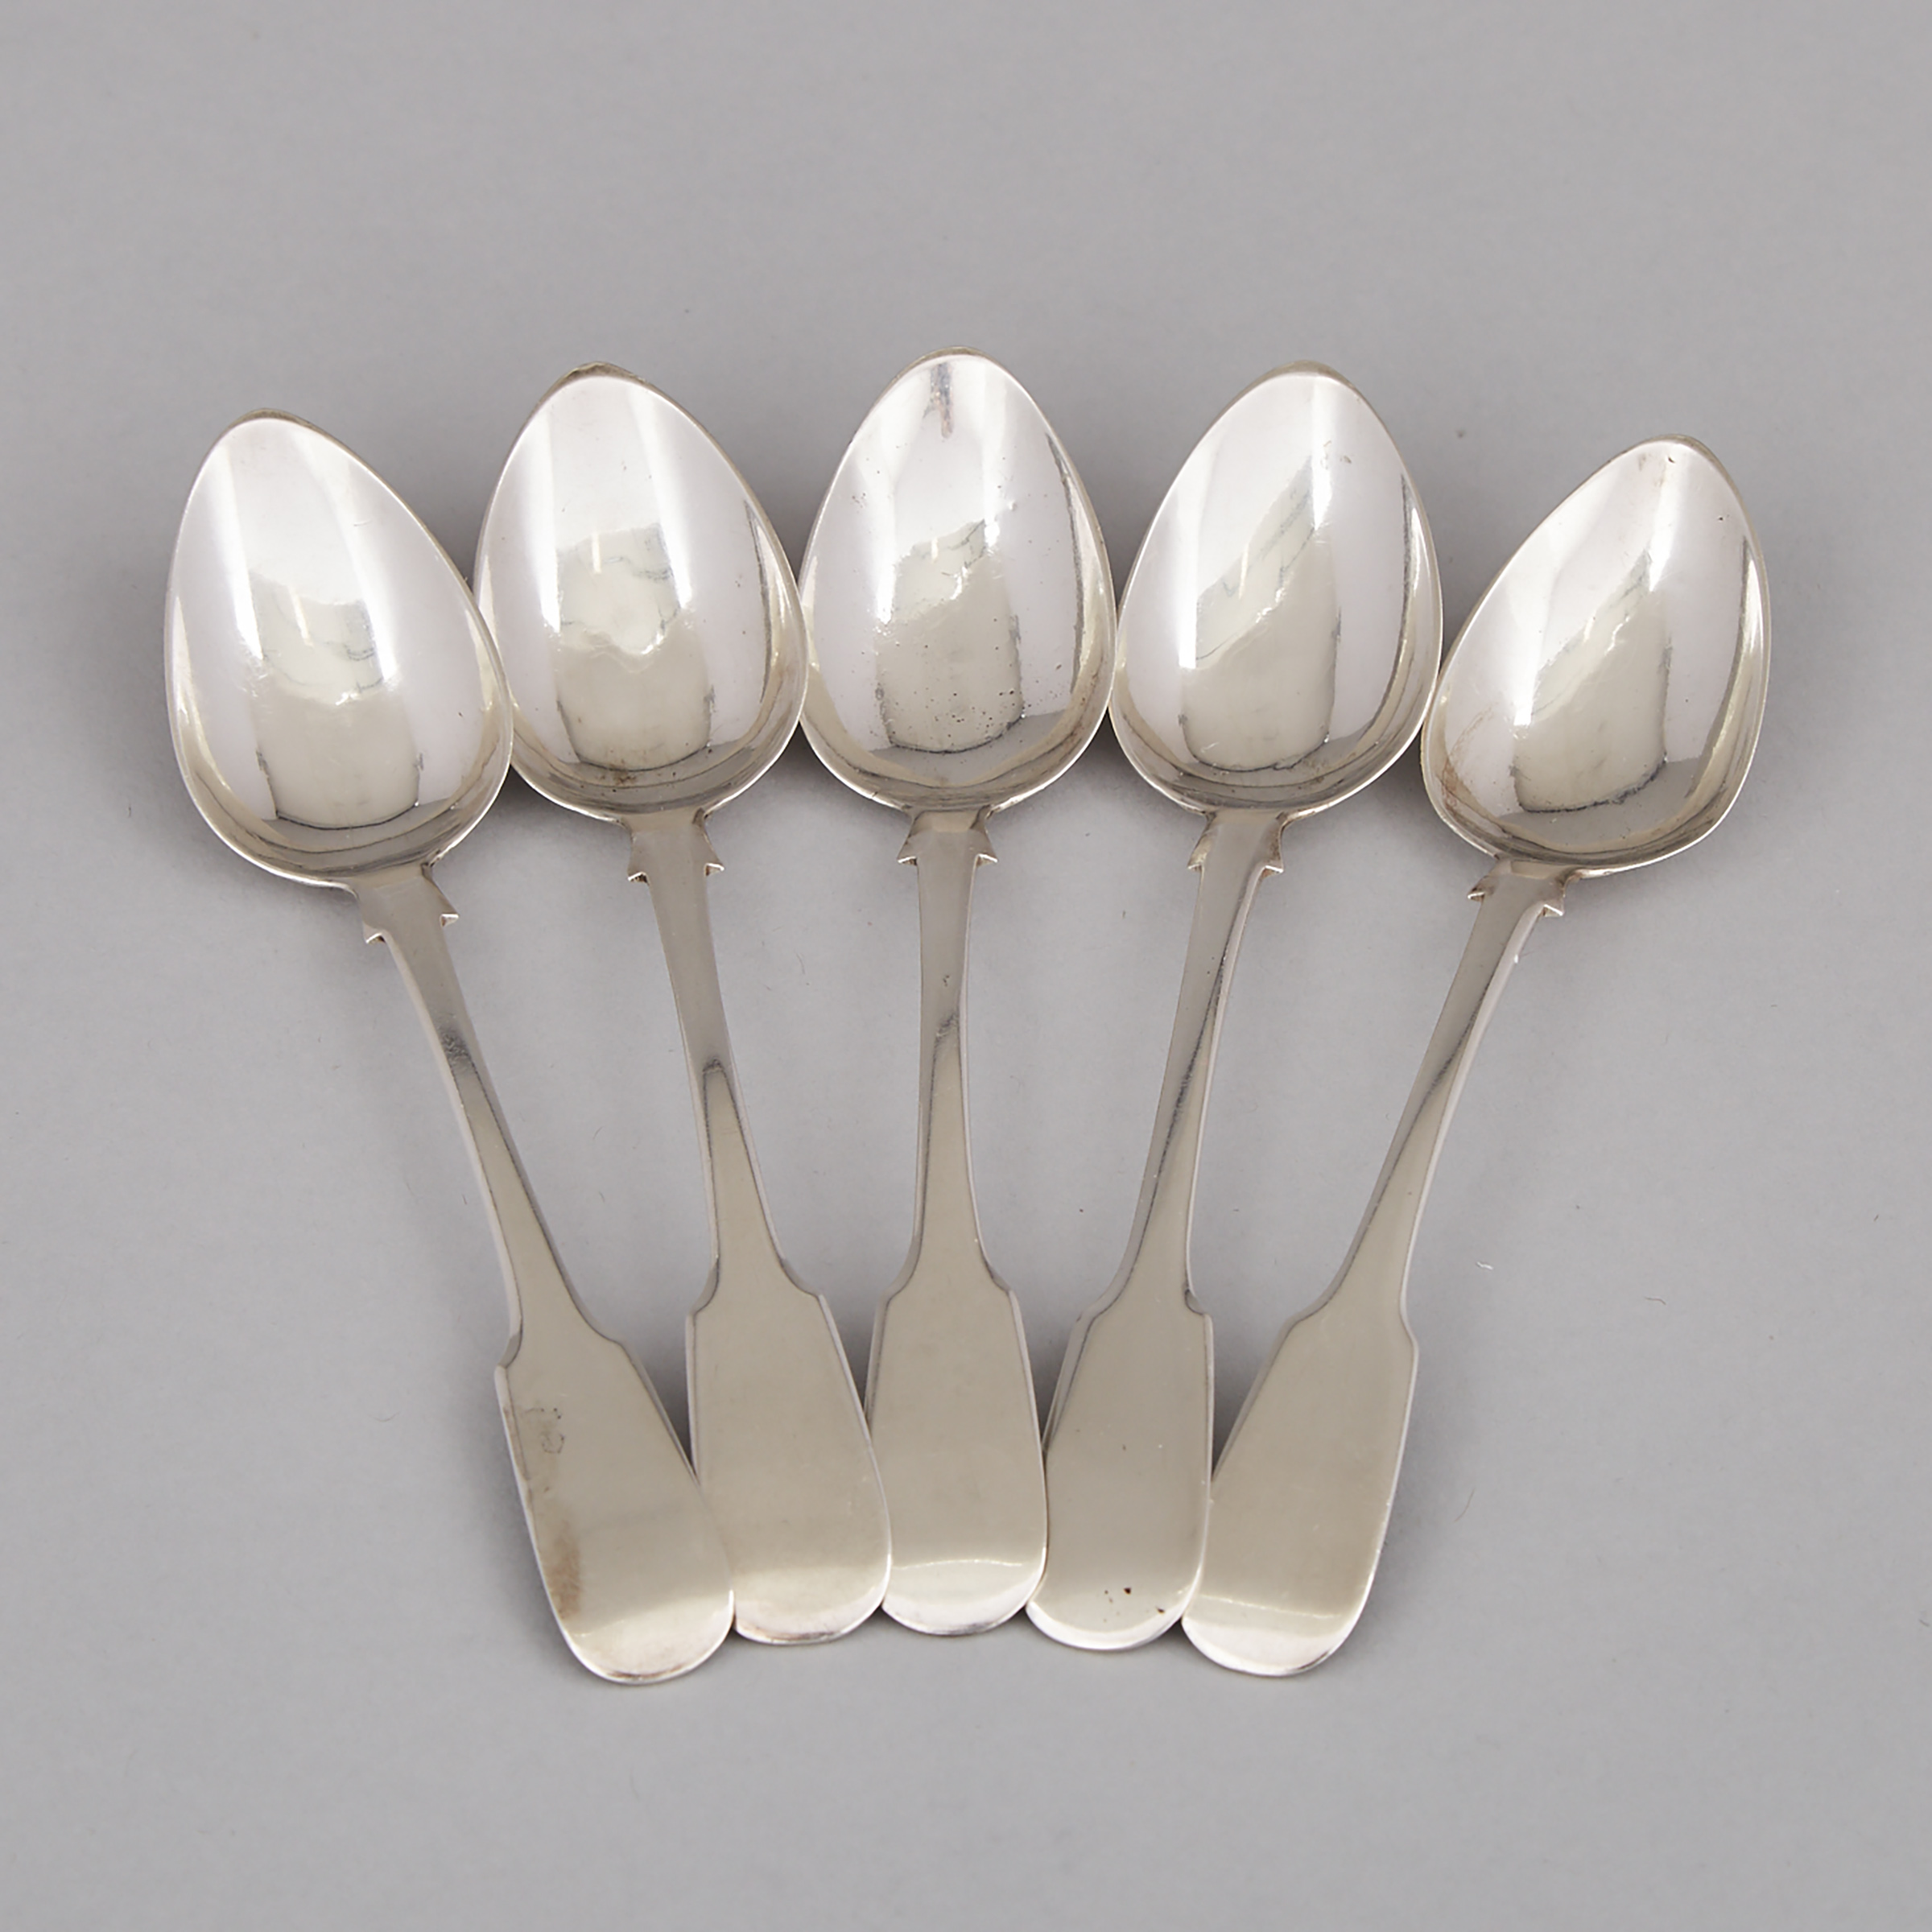 Five Canadian Silver Fiddle Pattern Tea Spoons, Peter Nordbeck, Halifax, mid-19th century